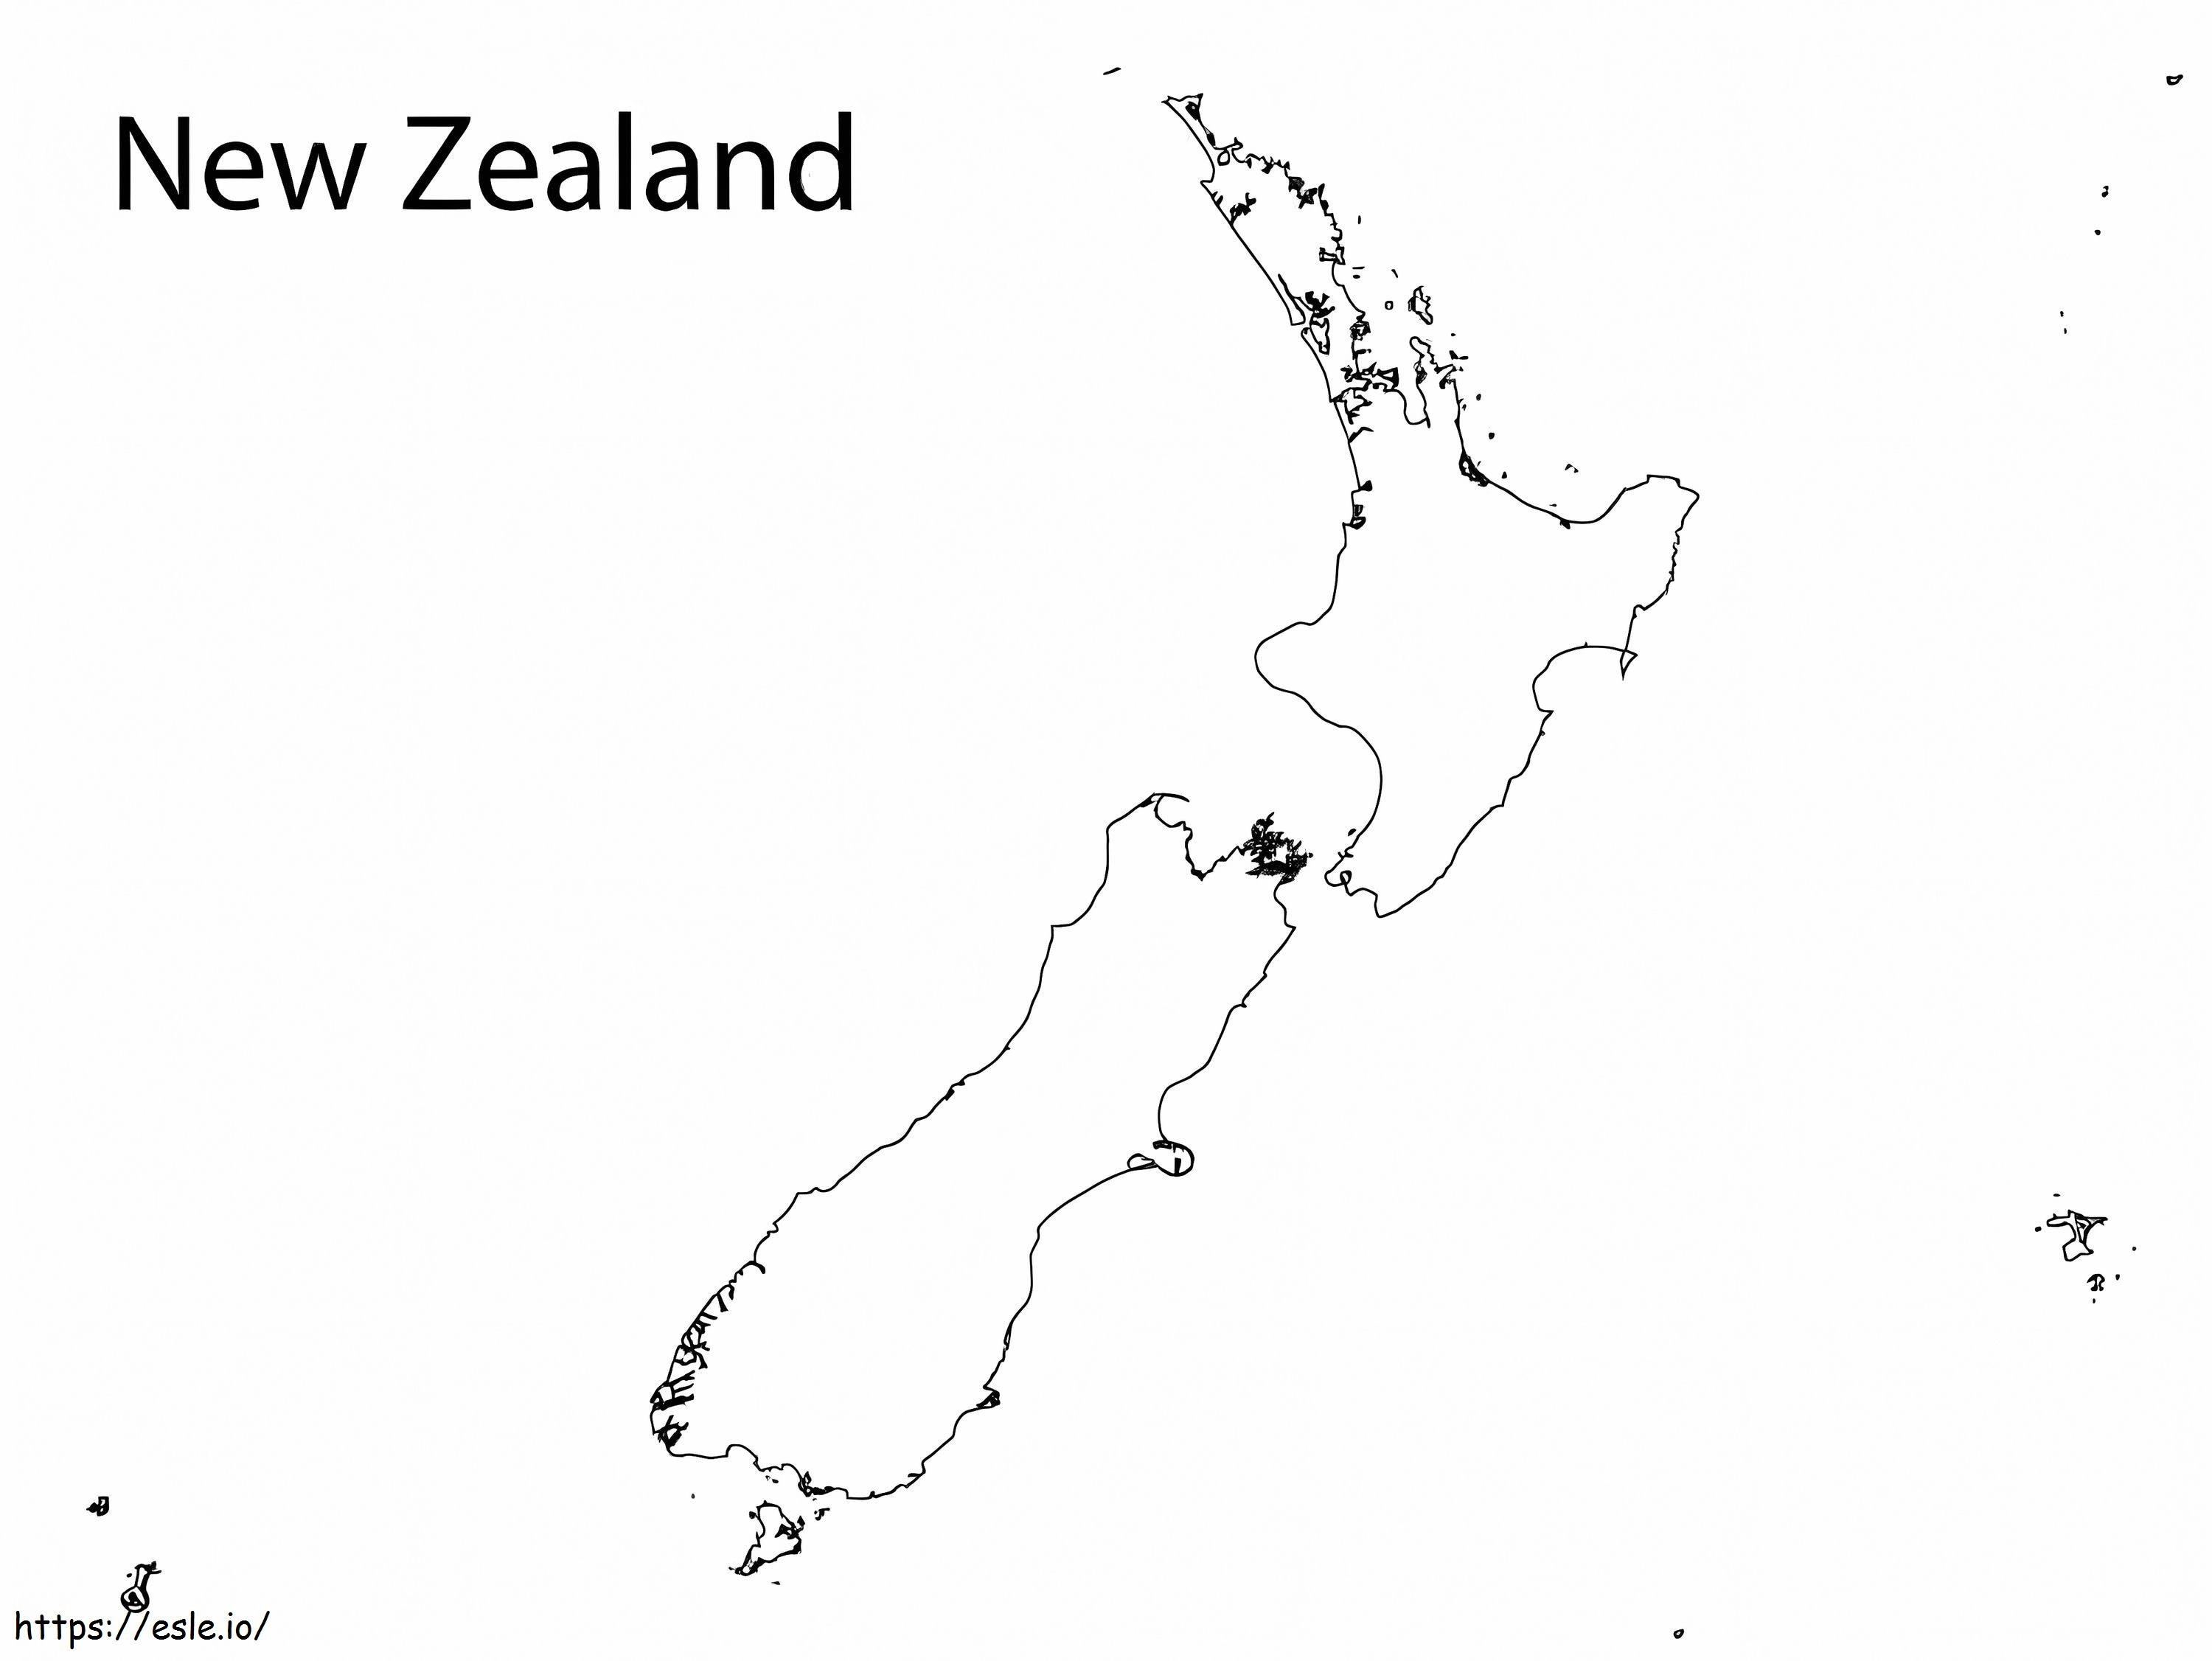 New Zealand Map coloring page